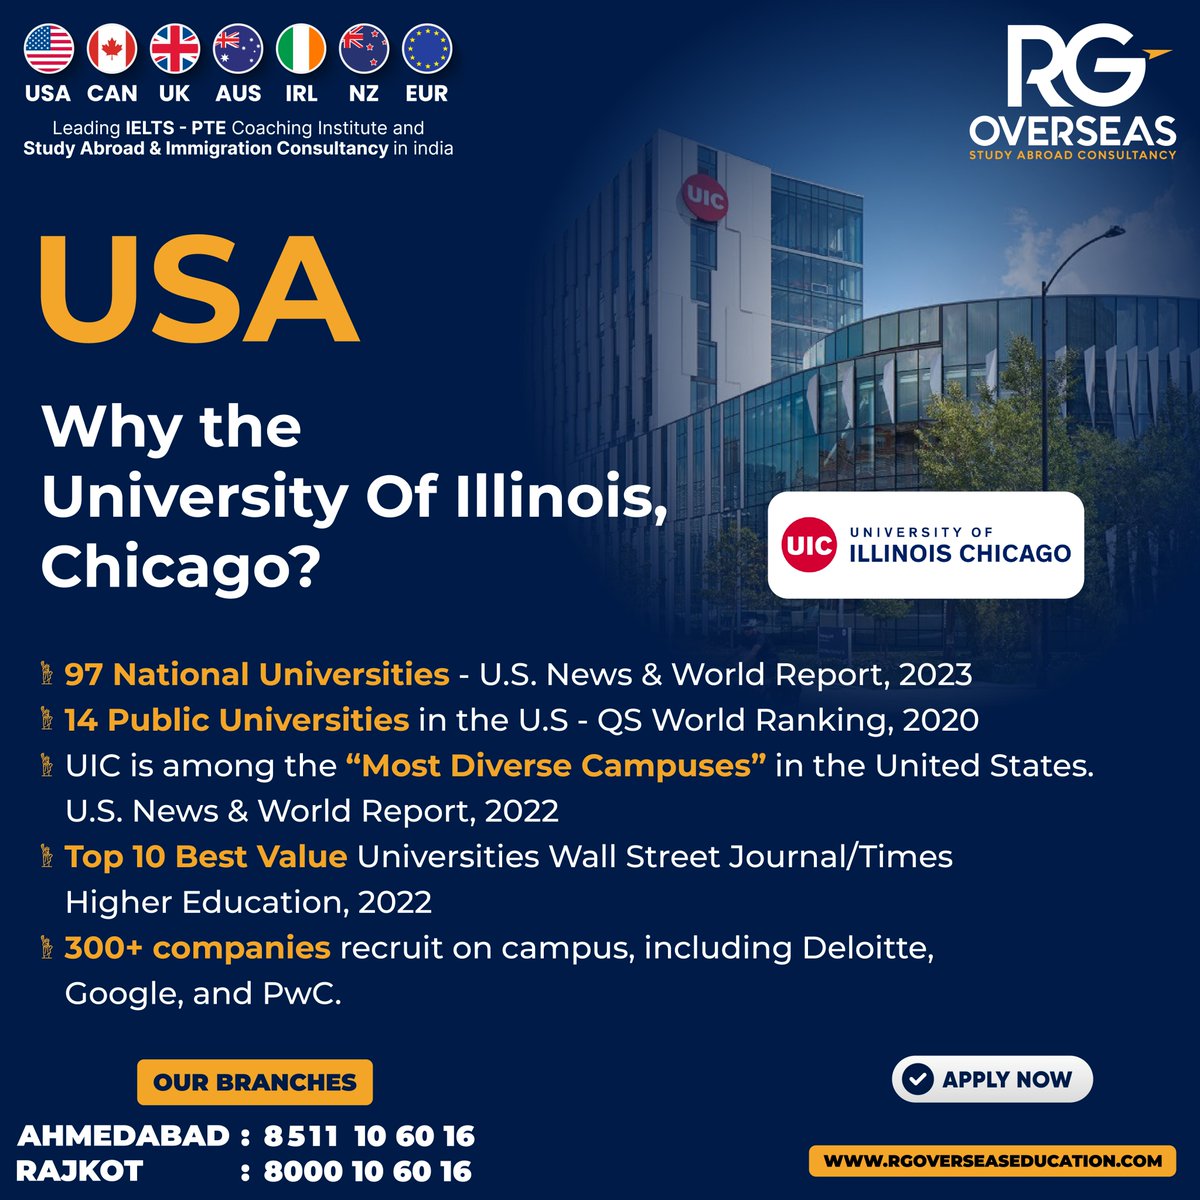 🇺🇸🎓 Dreaming of studying in the USA? 🌟 Discover why the University of Illinois, Chicago (UIC) is your gateway to success! 🏆📚

#universityofillinoischicago #uic #studyinusa #usaeducation #valueuniversities #careeropportunities #chicago #educationabroad #usavisa #ahmedabad